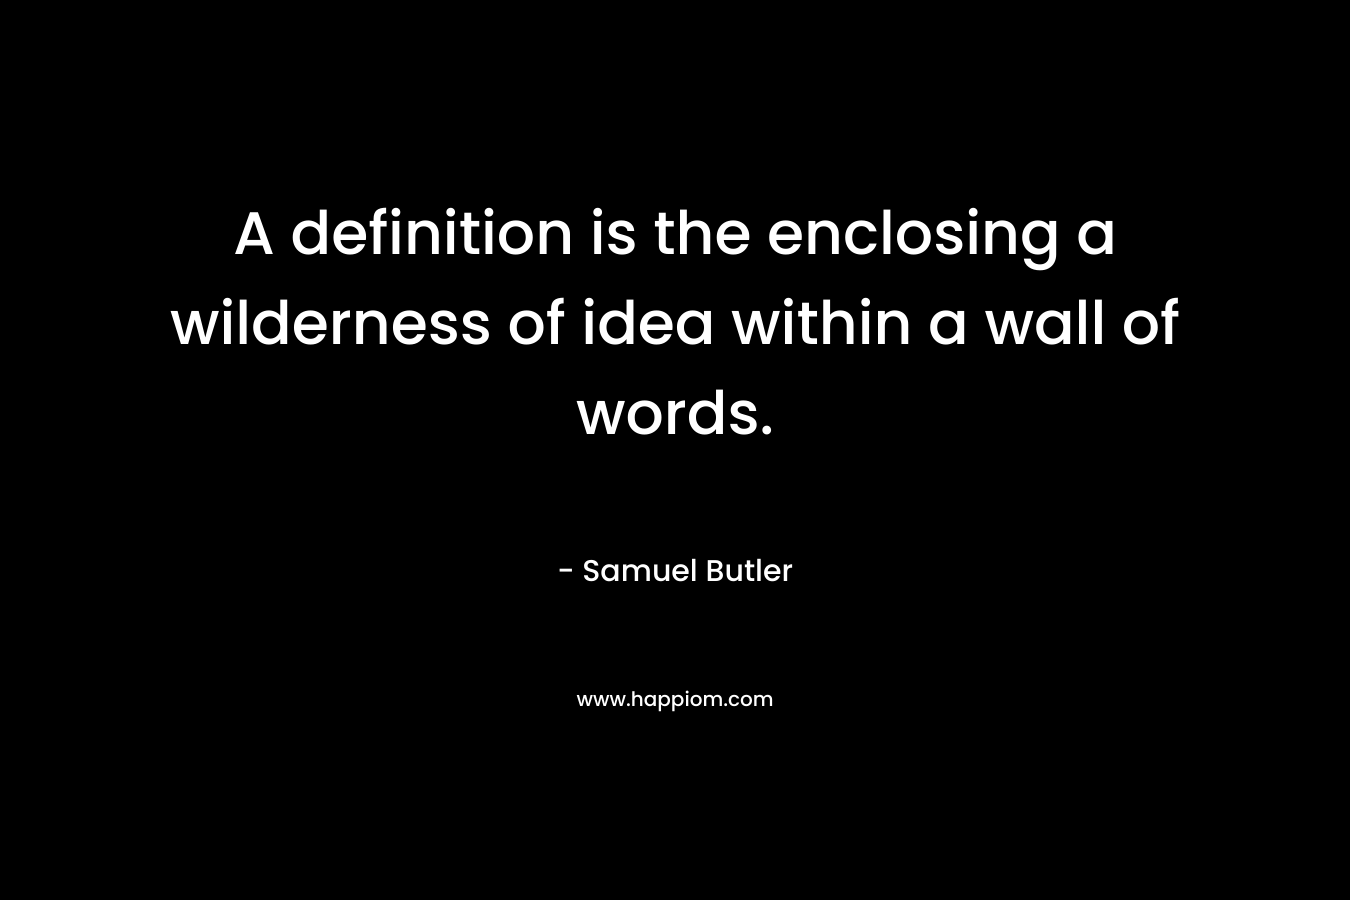 A definition is the enclosing a wilderness of idea within a wall of words.